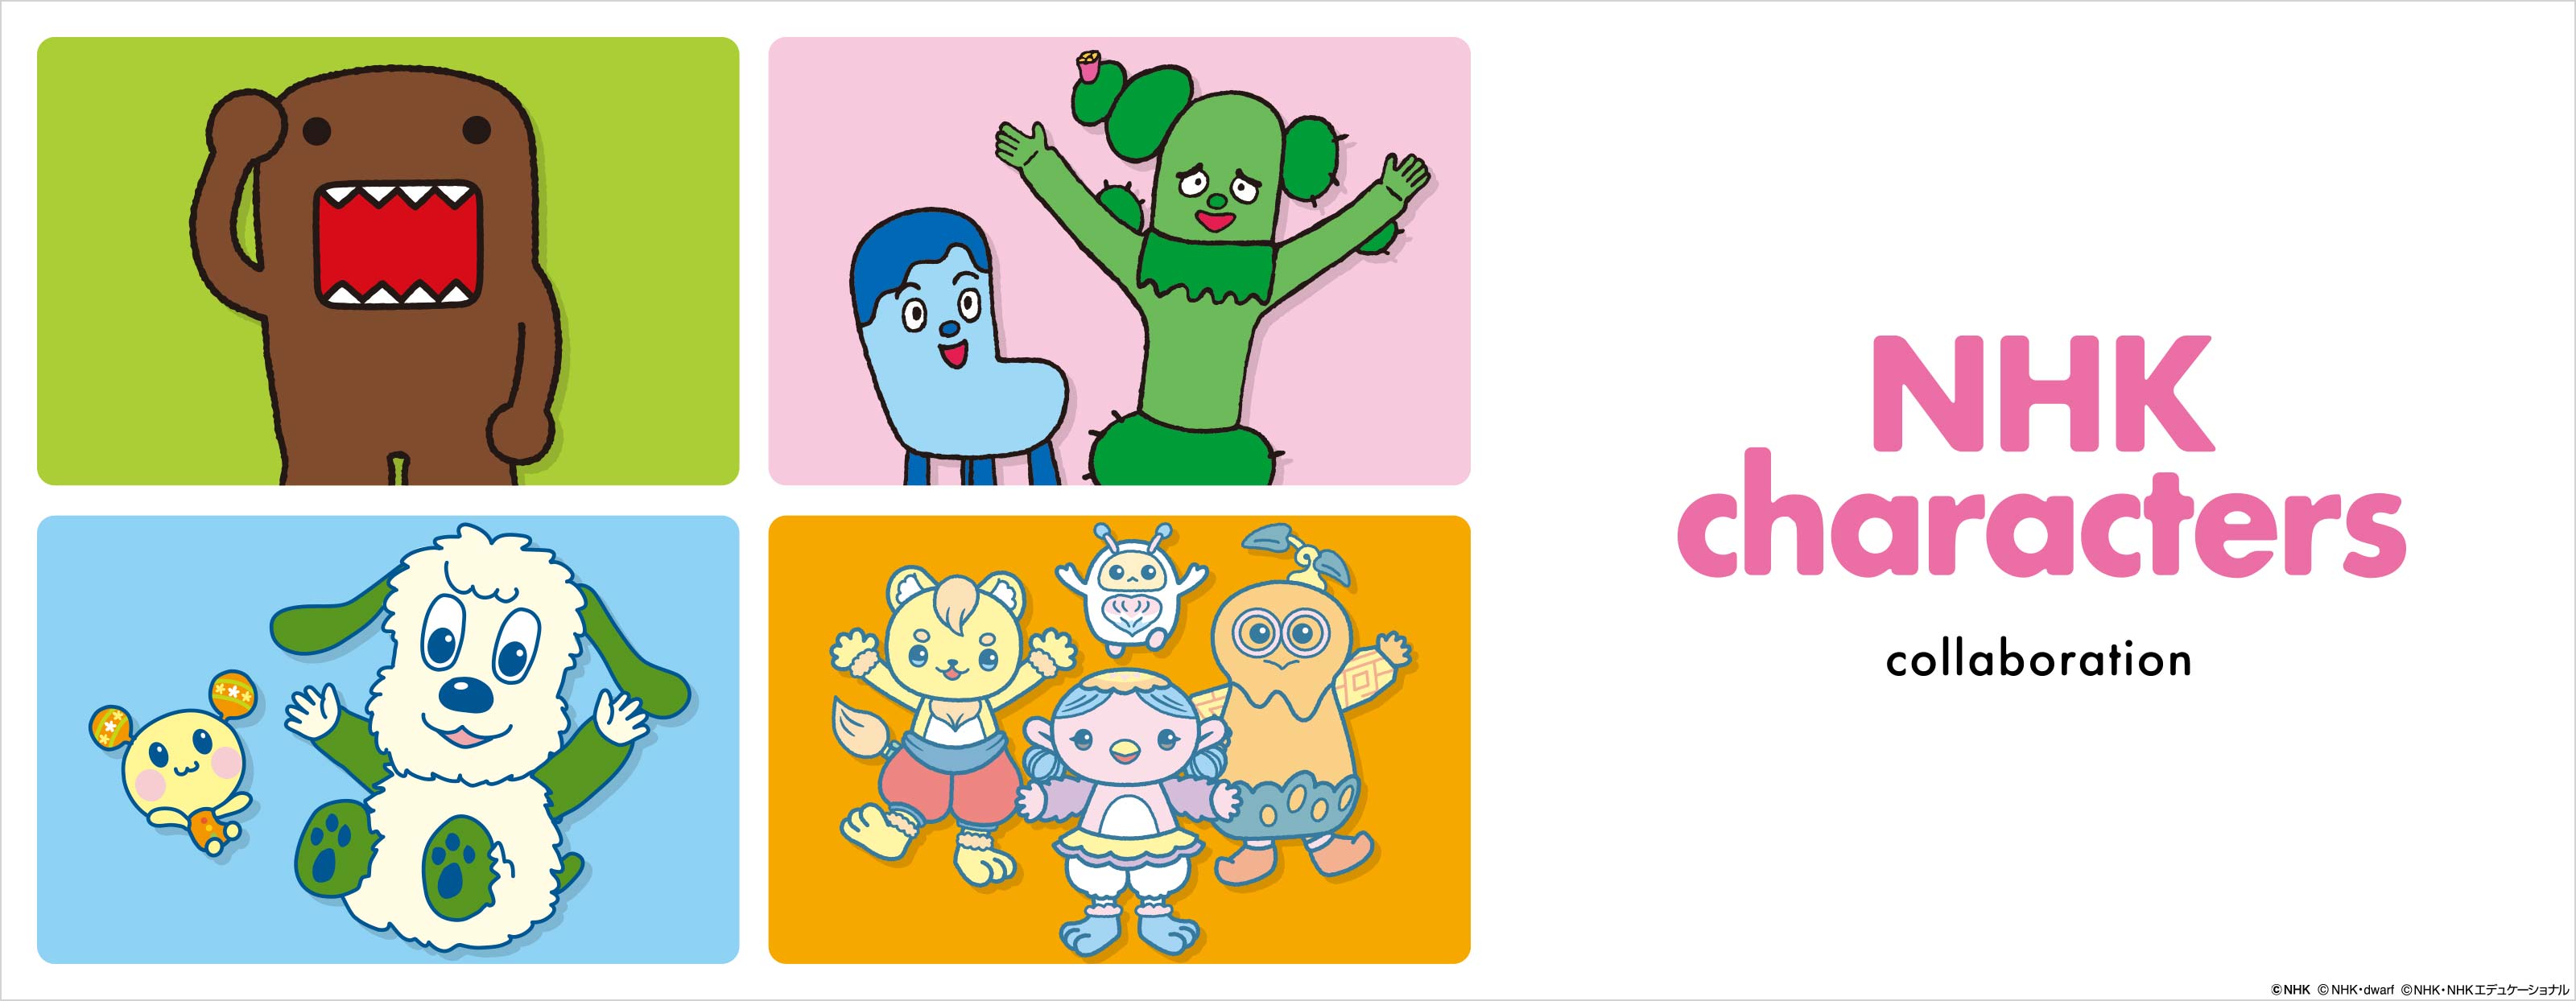 Graniph has collaborated with the NHK character "Domo-kun". Please enjoy the lively line-up that can be enjoyed by children and adults alike.[ssorder:-20230502]